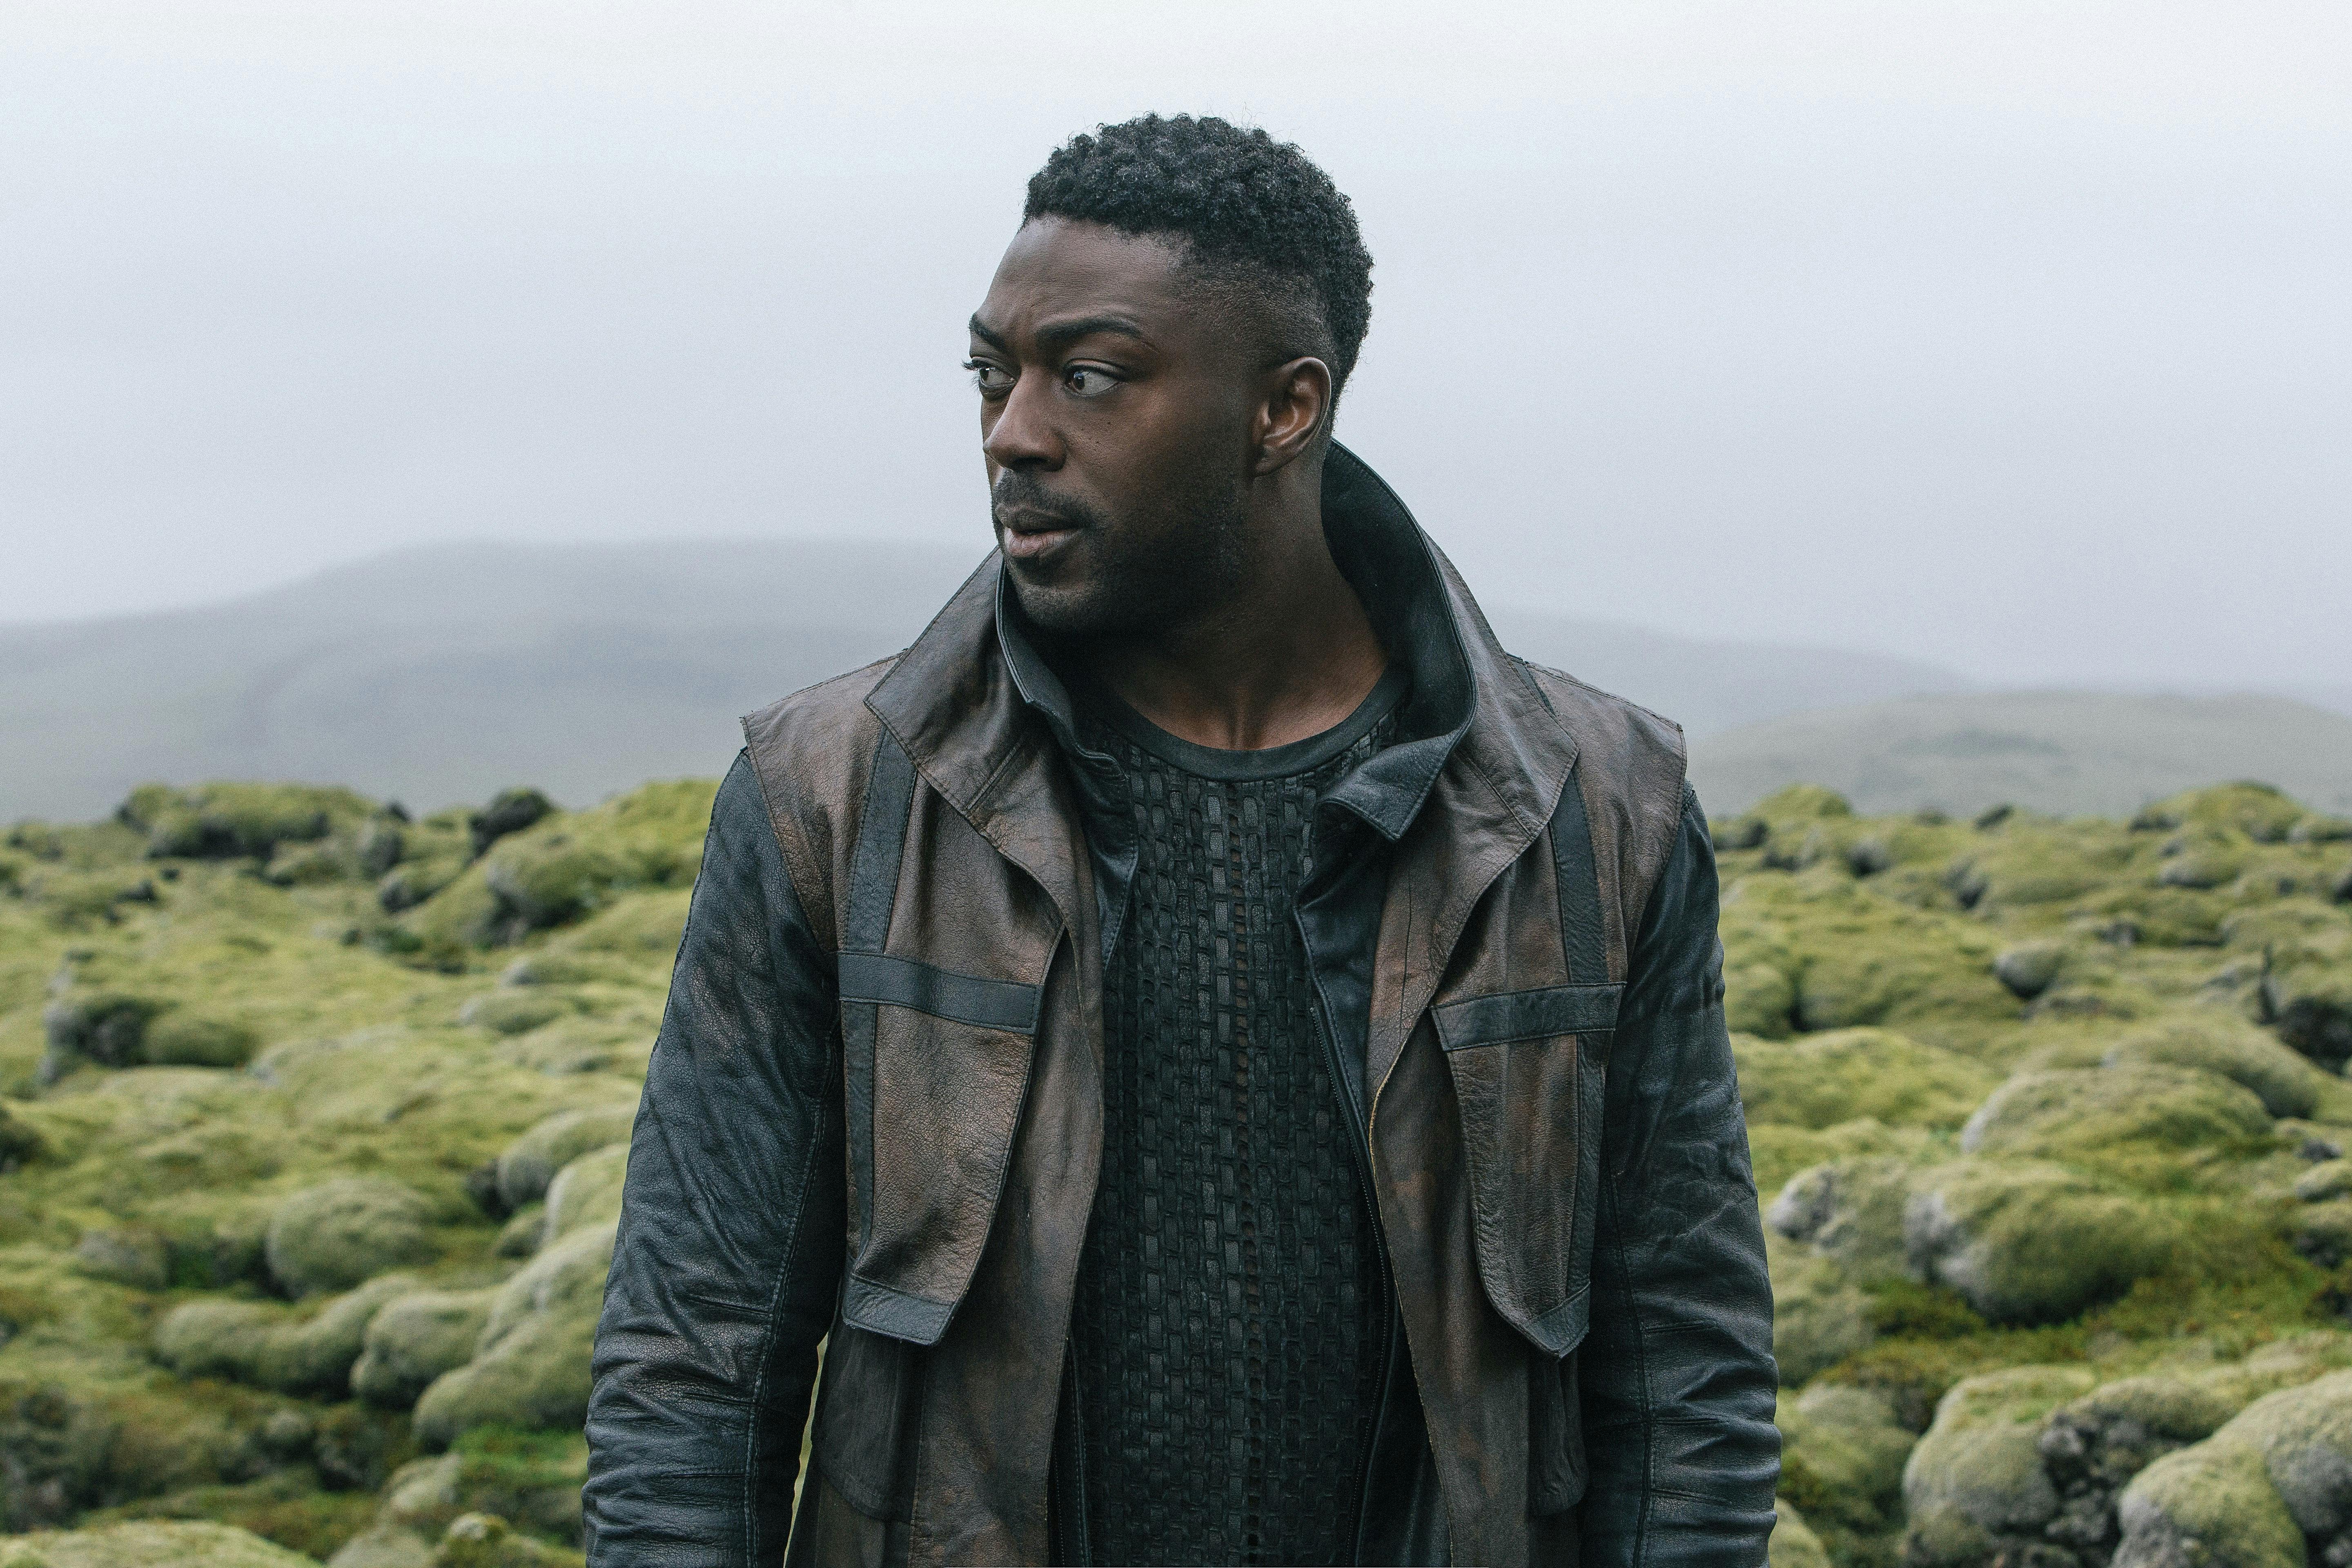 David Ajala stands as Book in Star Trek: Discovery 'The Hope That Is You, Part 1'